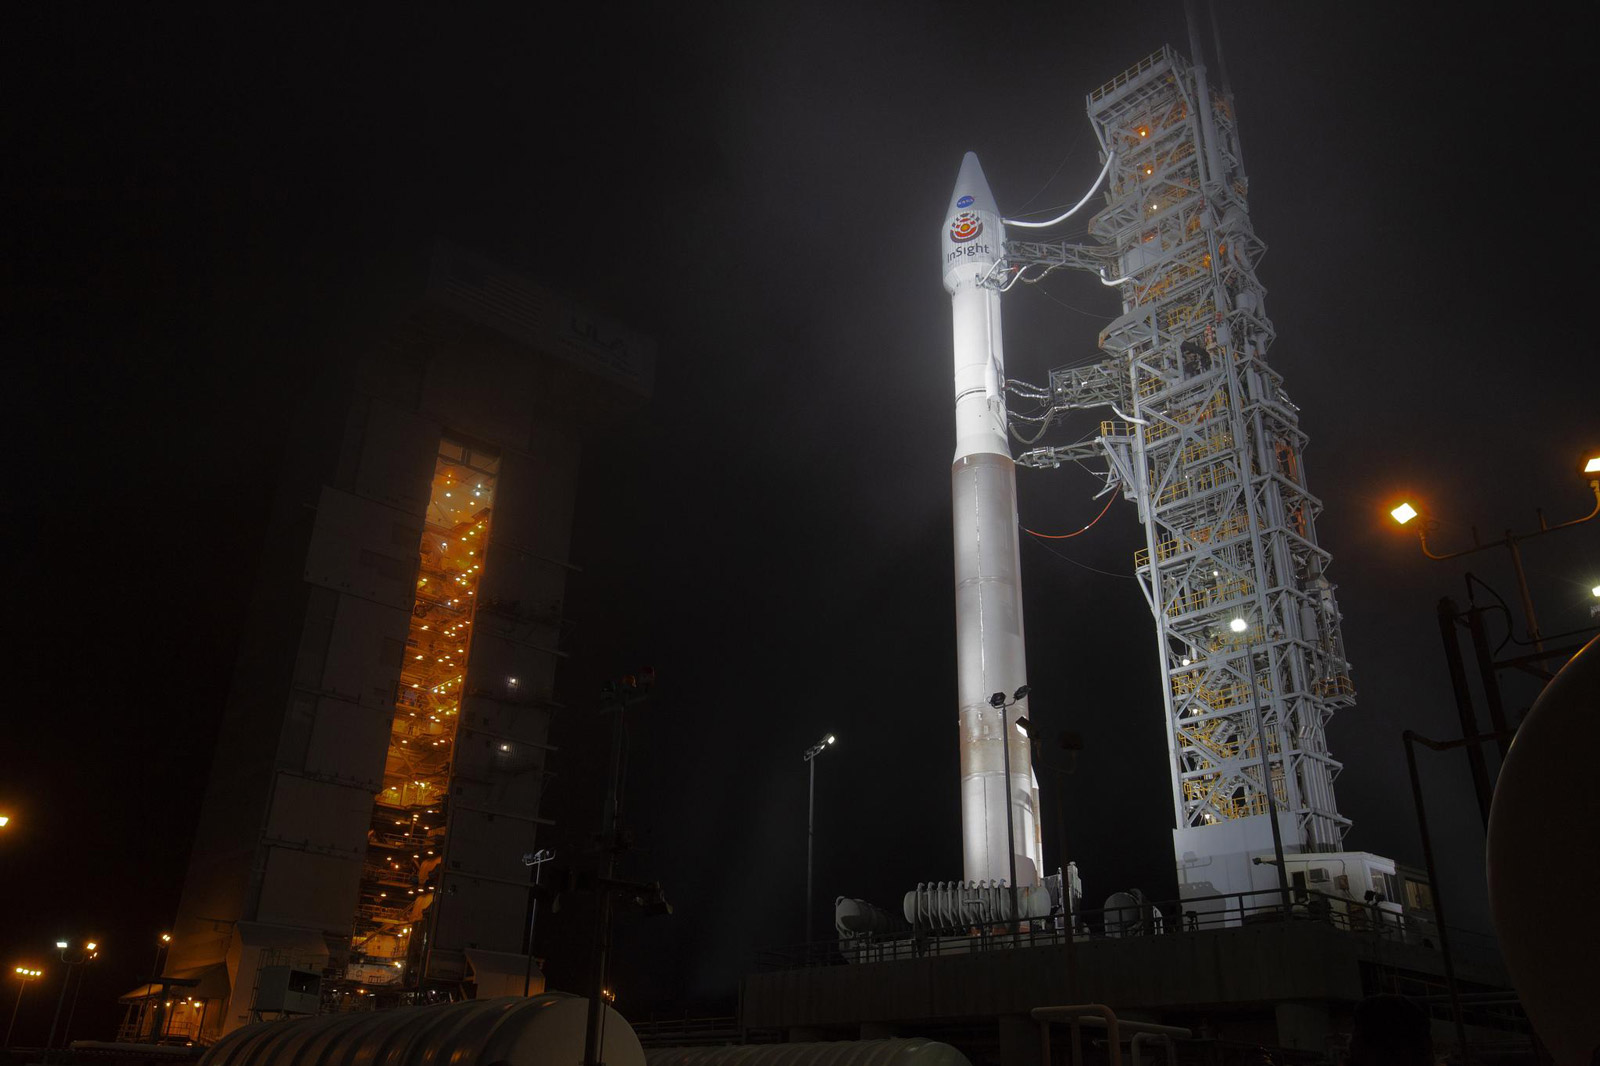 At Vandenberg Air Force Base in California, the gantry rolls back at Space Launch Complex 3 in preparation for the liftoff of NASA's Interior Exploration using Seismic Investigations, Geodesy and Heat Transport, or InSight, Mars lander.